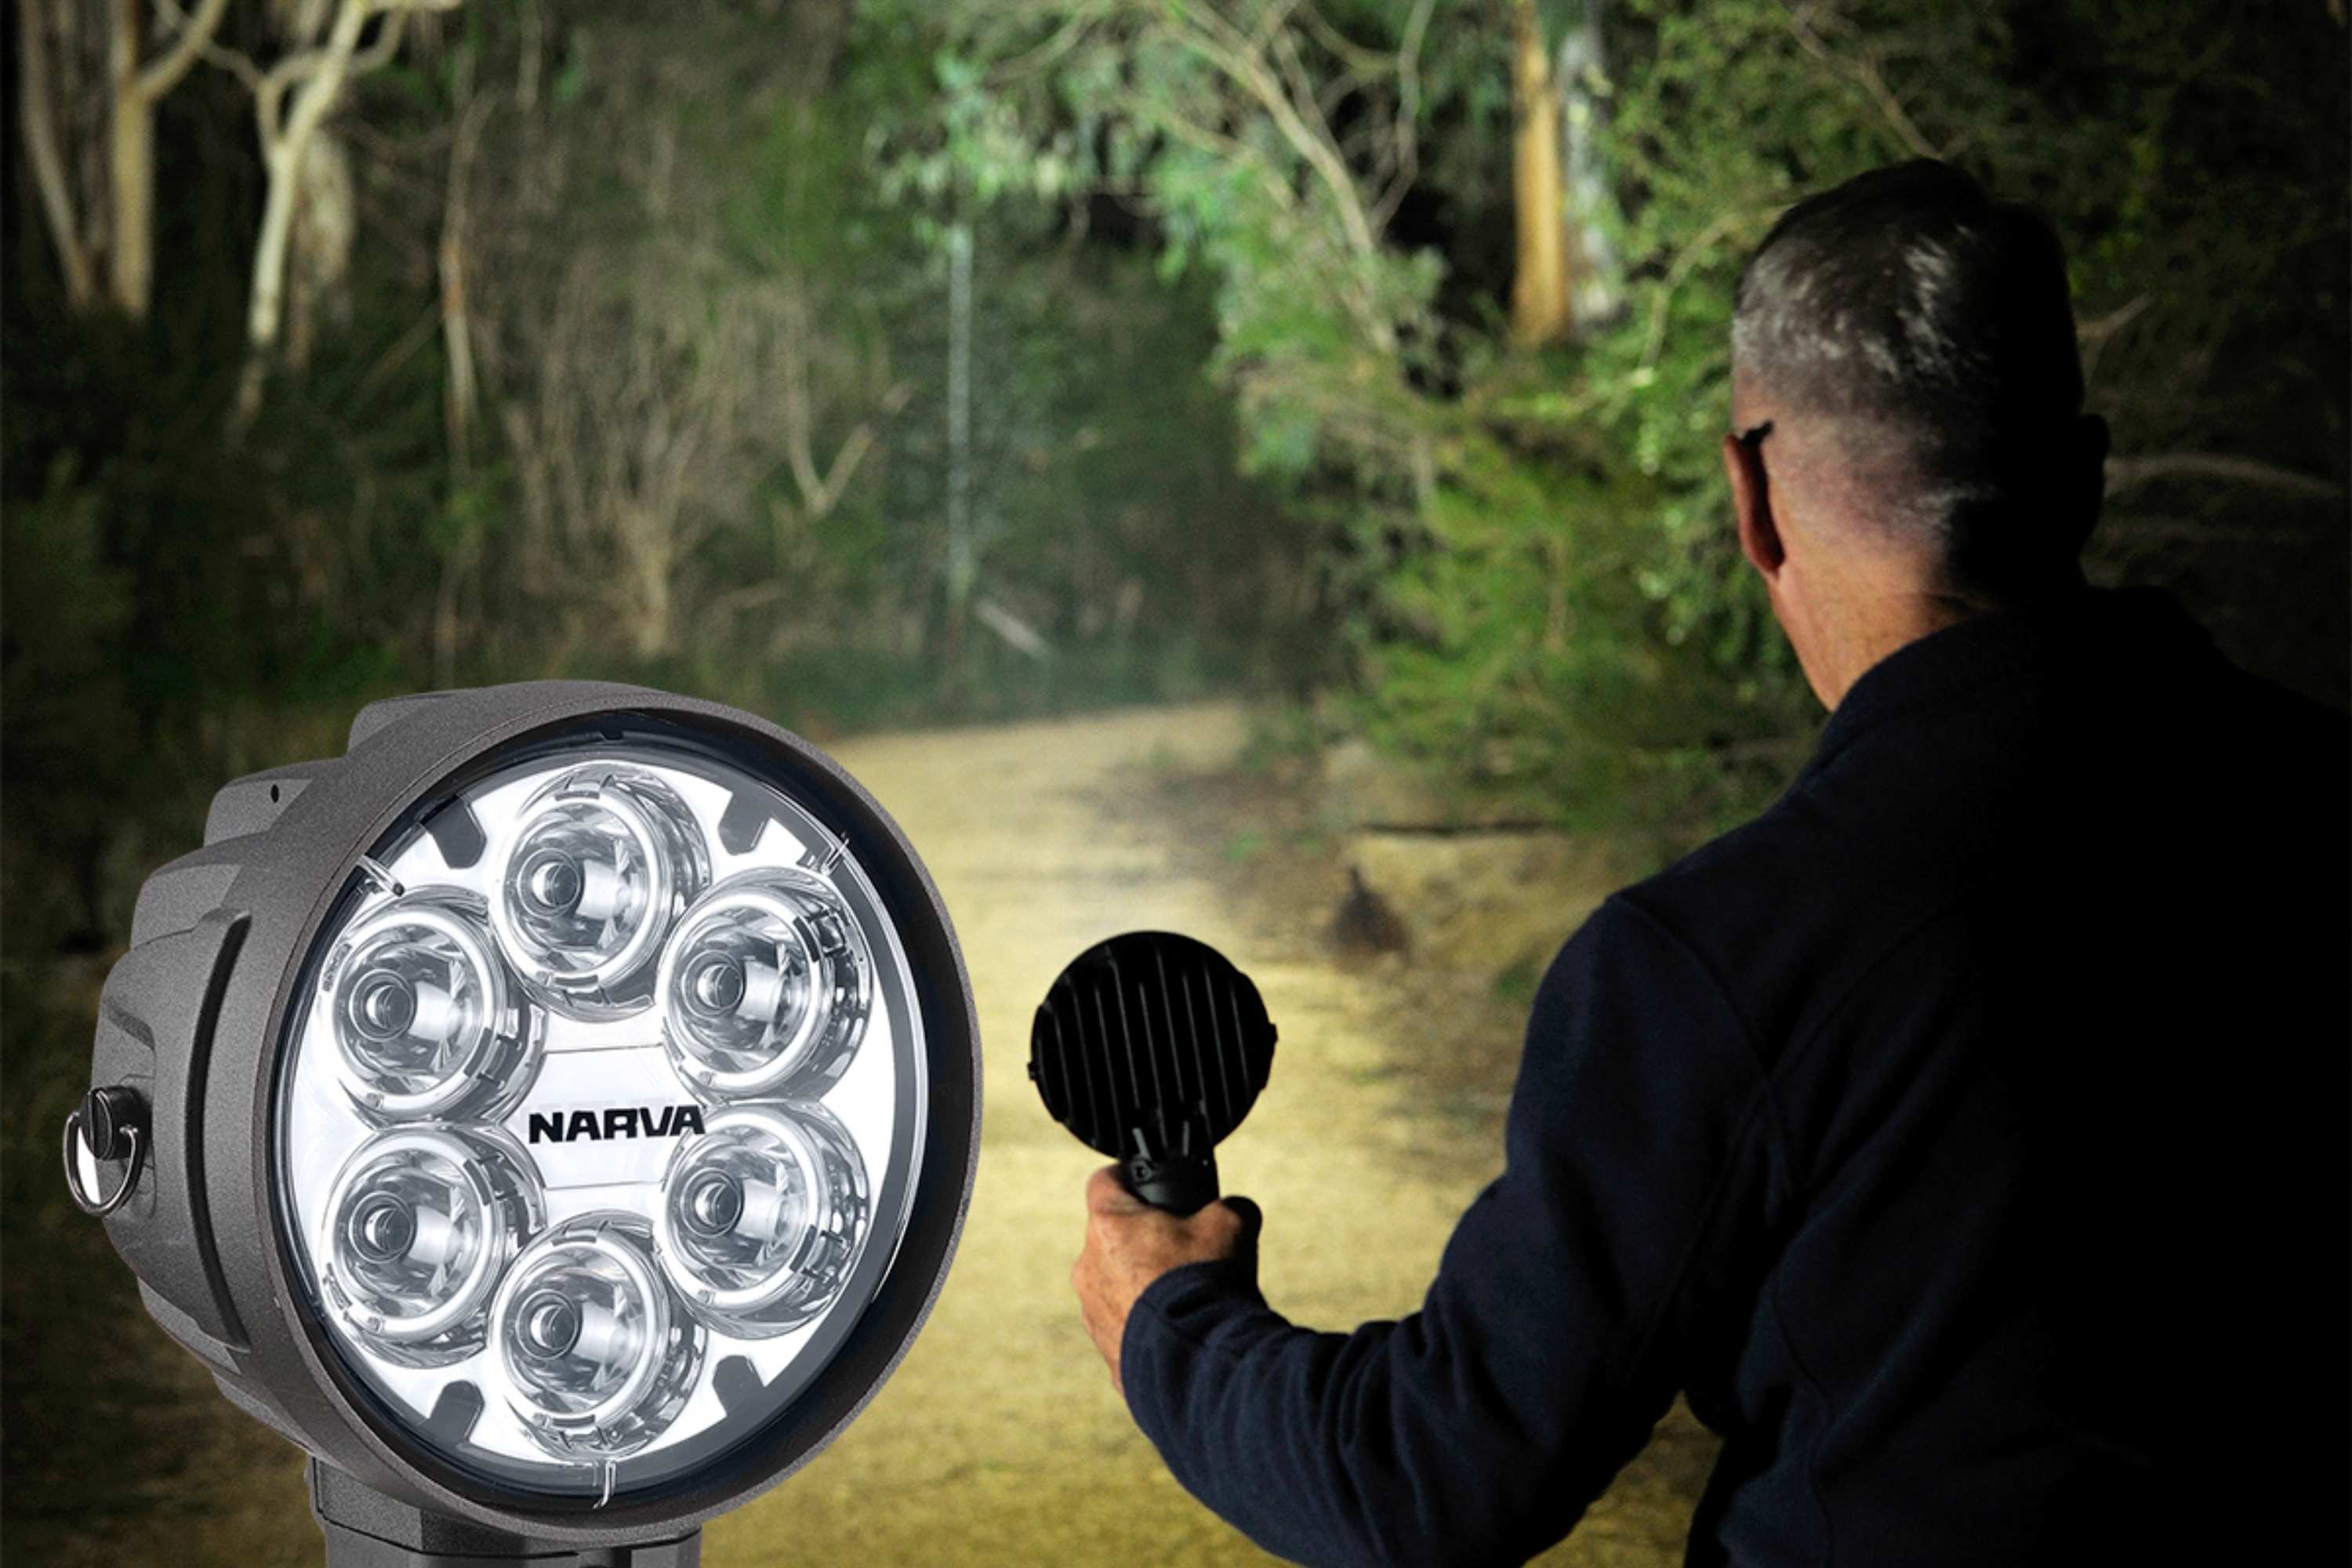 High quality and reliable lighting is a prerequisite for people involved in security and emergency service work, as well as recreational pursuits such as fishing, camping and hunting. Fortunately, Narva's new 'Colt 1000' L.E.D Handheld Spotlights have these activities covered, providing two model options, one corded and the second, battery-powered. These new lights are the modern successor to Narva's popular 'Colt 100' handheld halogen spotlight.